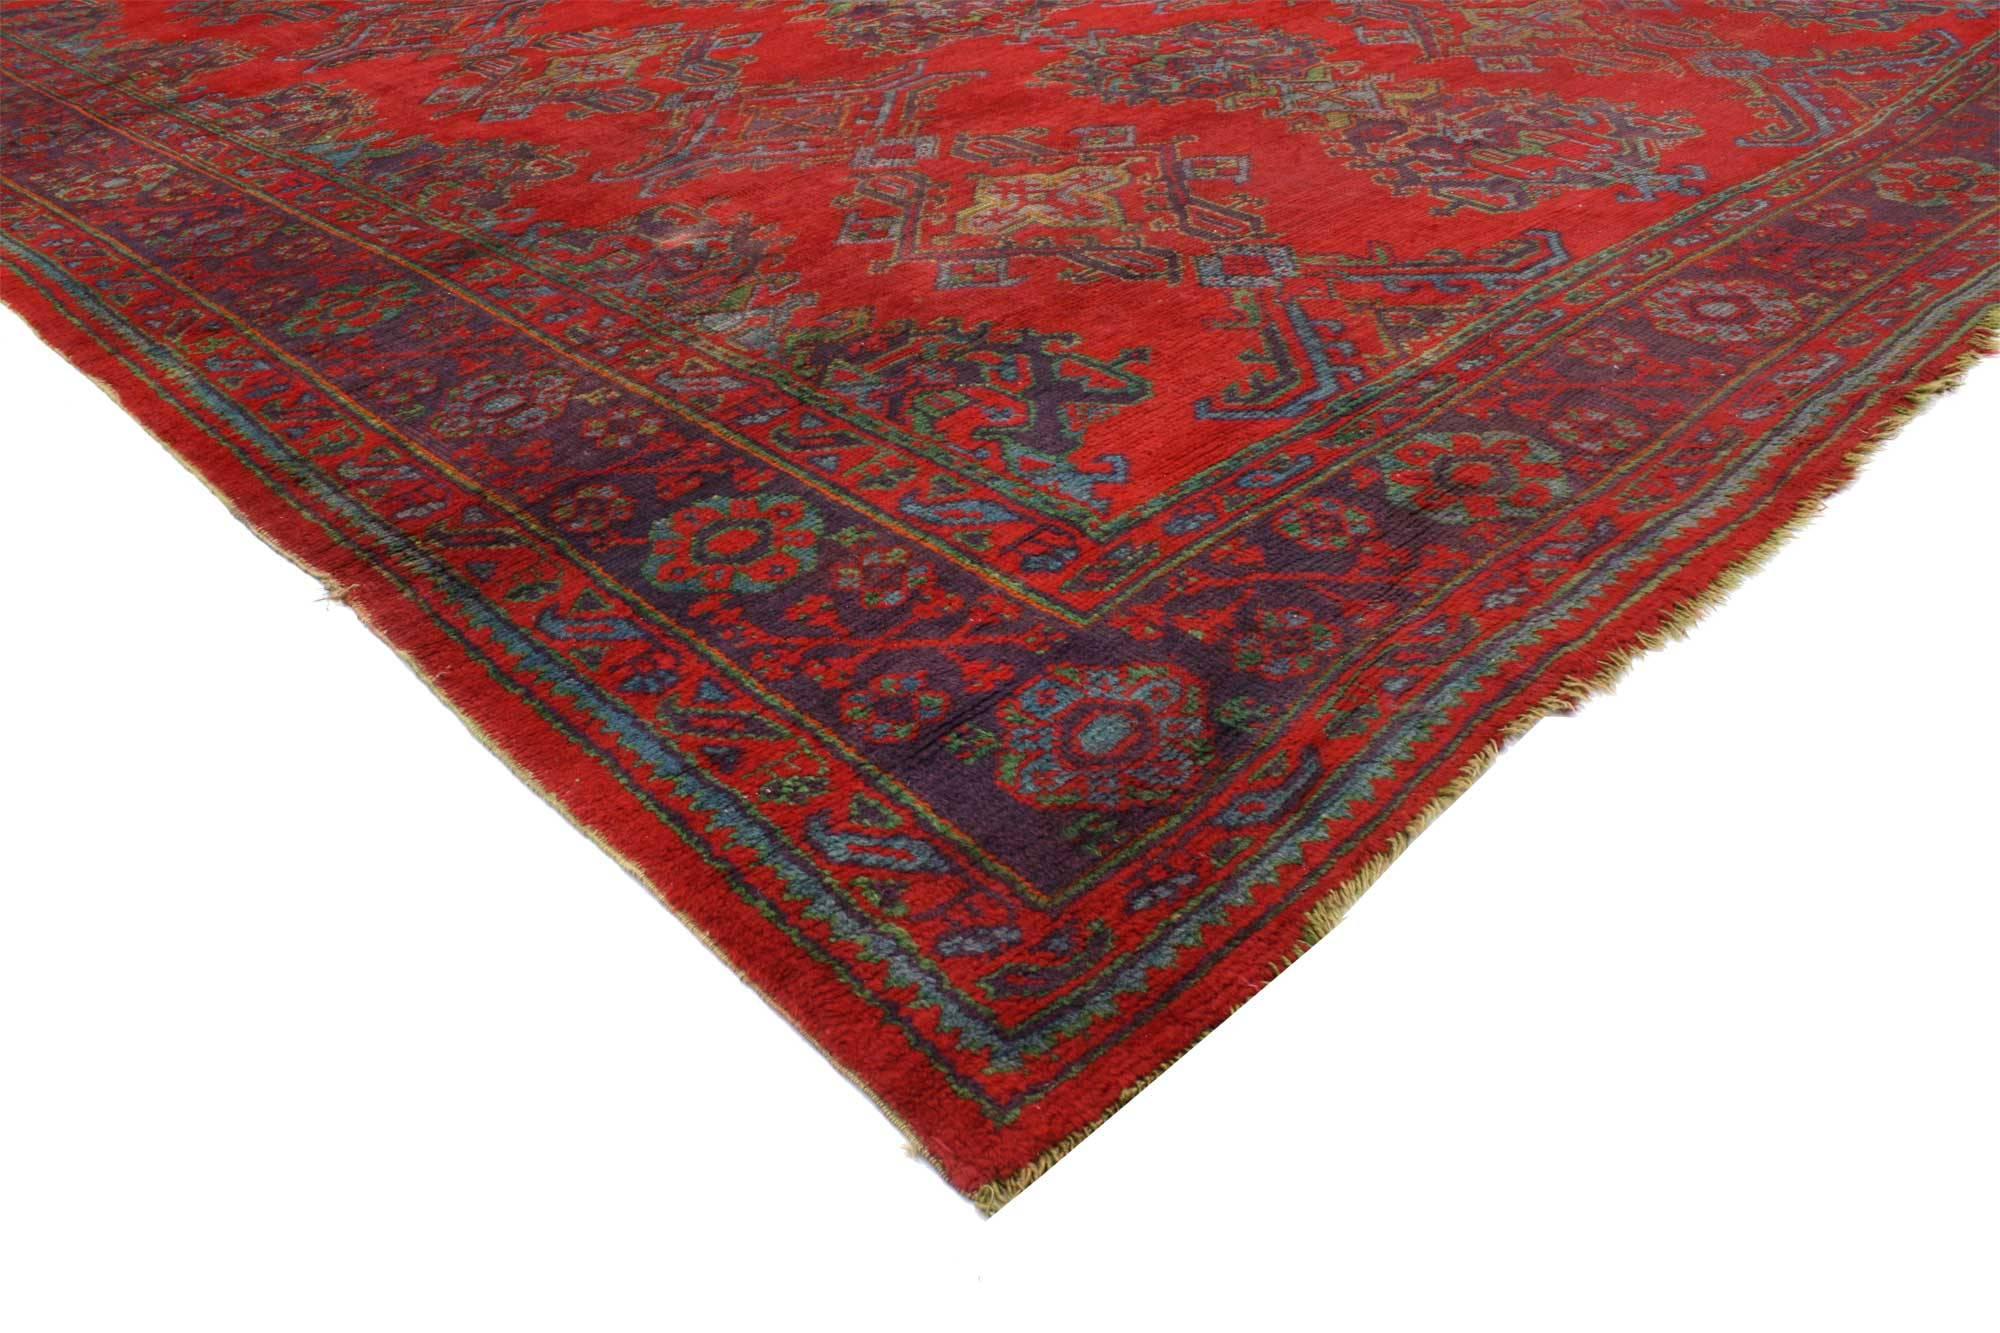 76752, Vintage Turkish Oushak Rug Inspired by Thomas Eakins. This hand-knotted wool vintage Turkish Oushak rug not only carries deep meaning woven within the piece, but it is also very similar to the Oushak rug is in a painting from 1876, 'Portrait